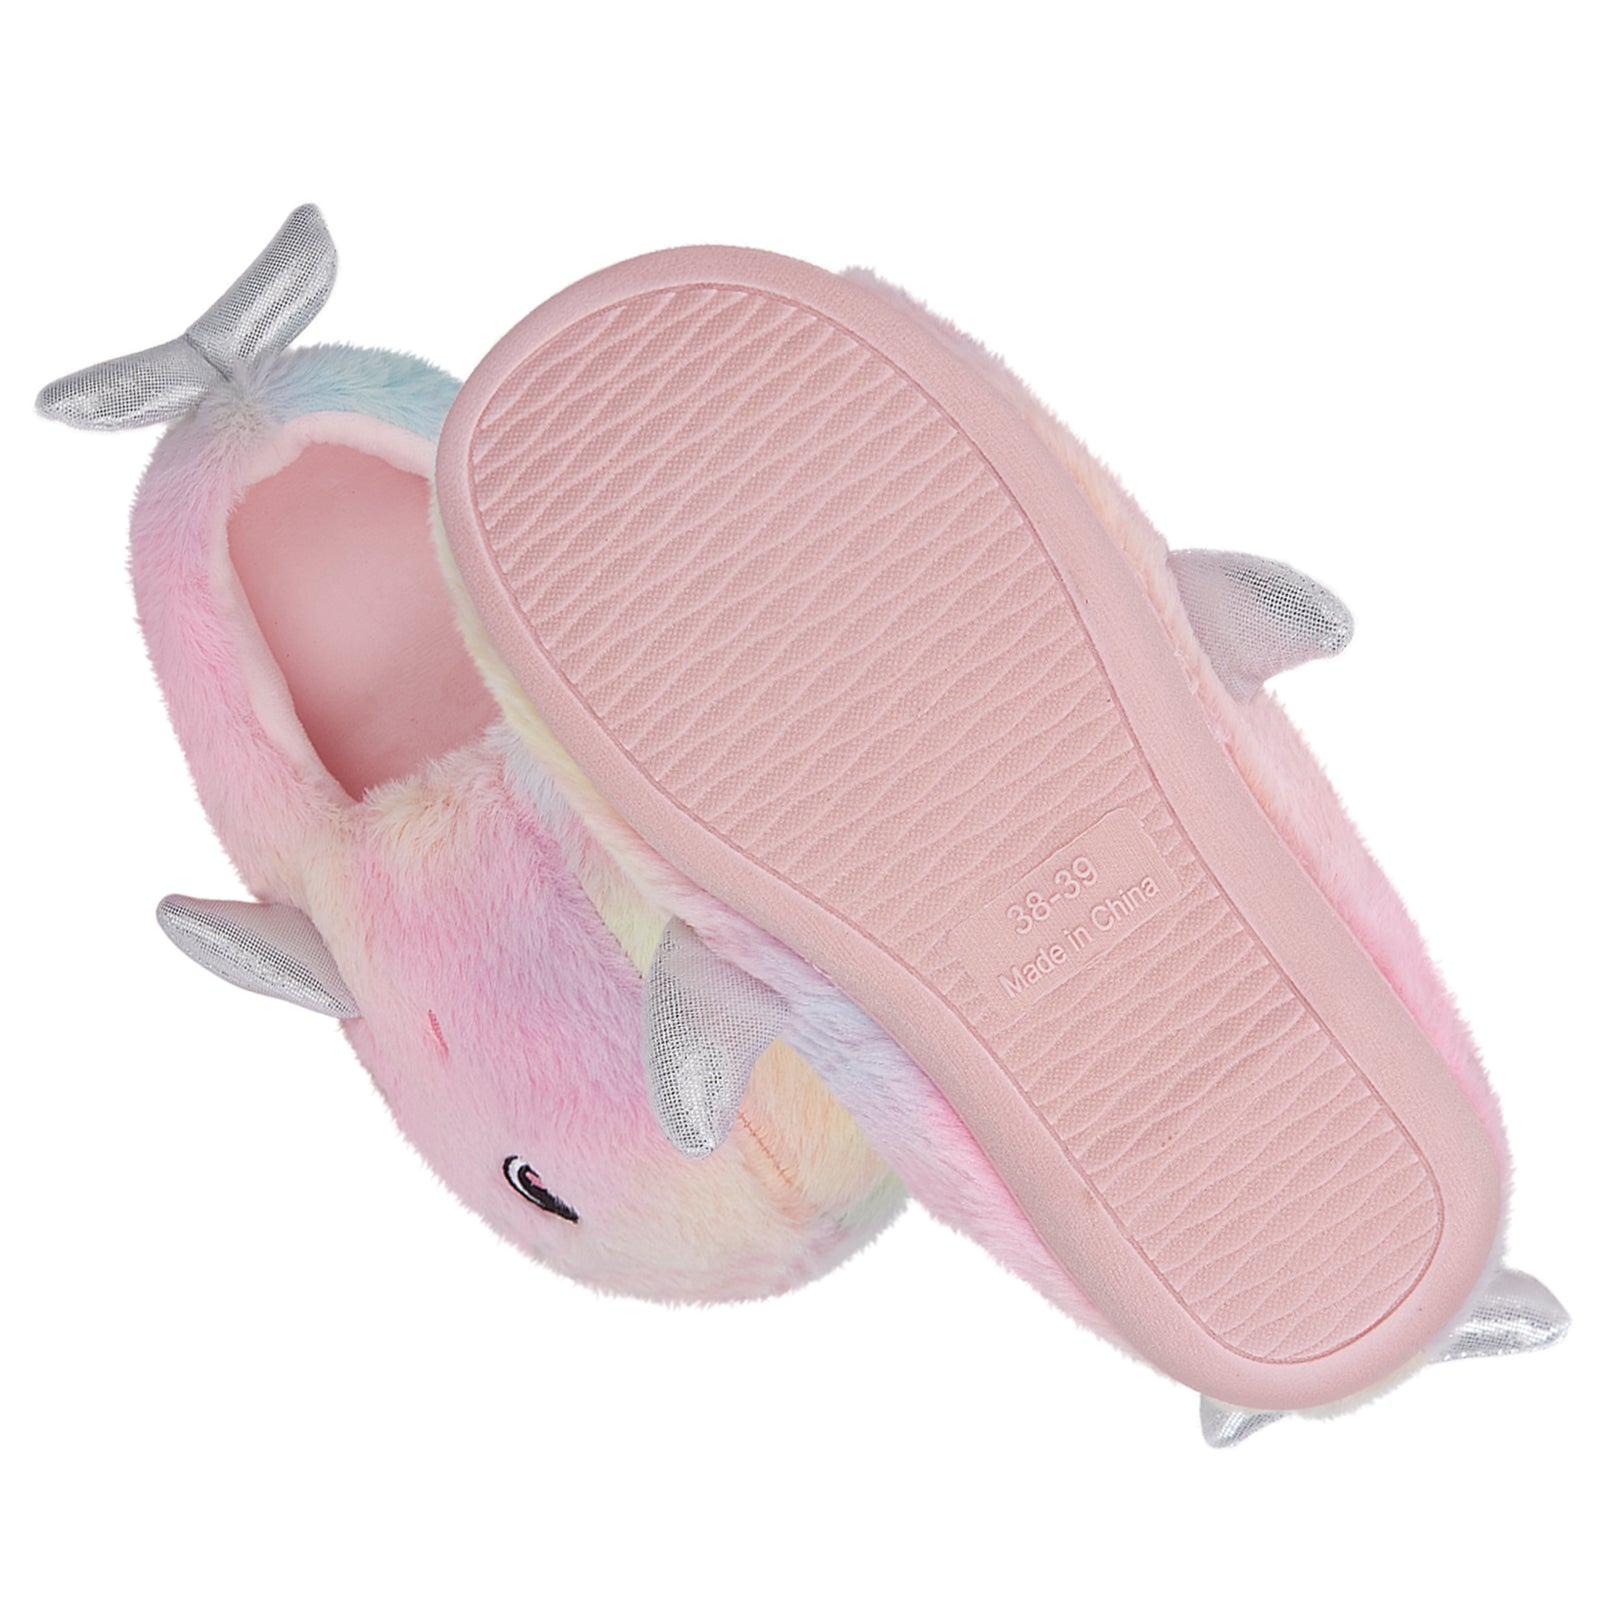 Rainbow Whale All-inclusive Slippers with Roots Warm Fuzzy Microfiber Dusting Animal Slippers Indoor and Outdoor, House Shoes Gifts for Girls/Women